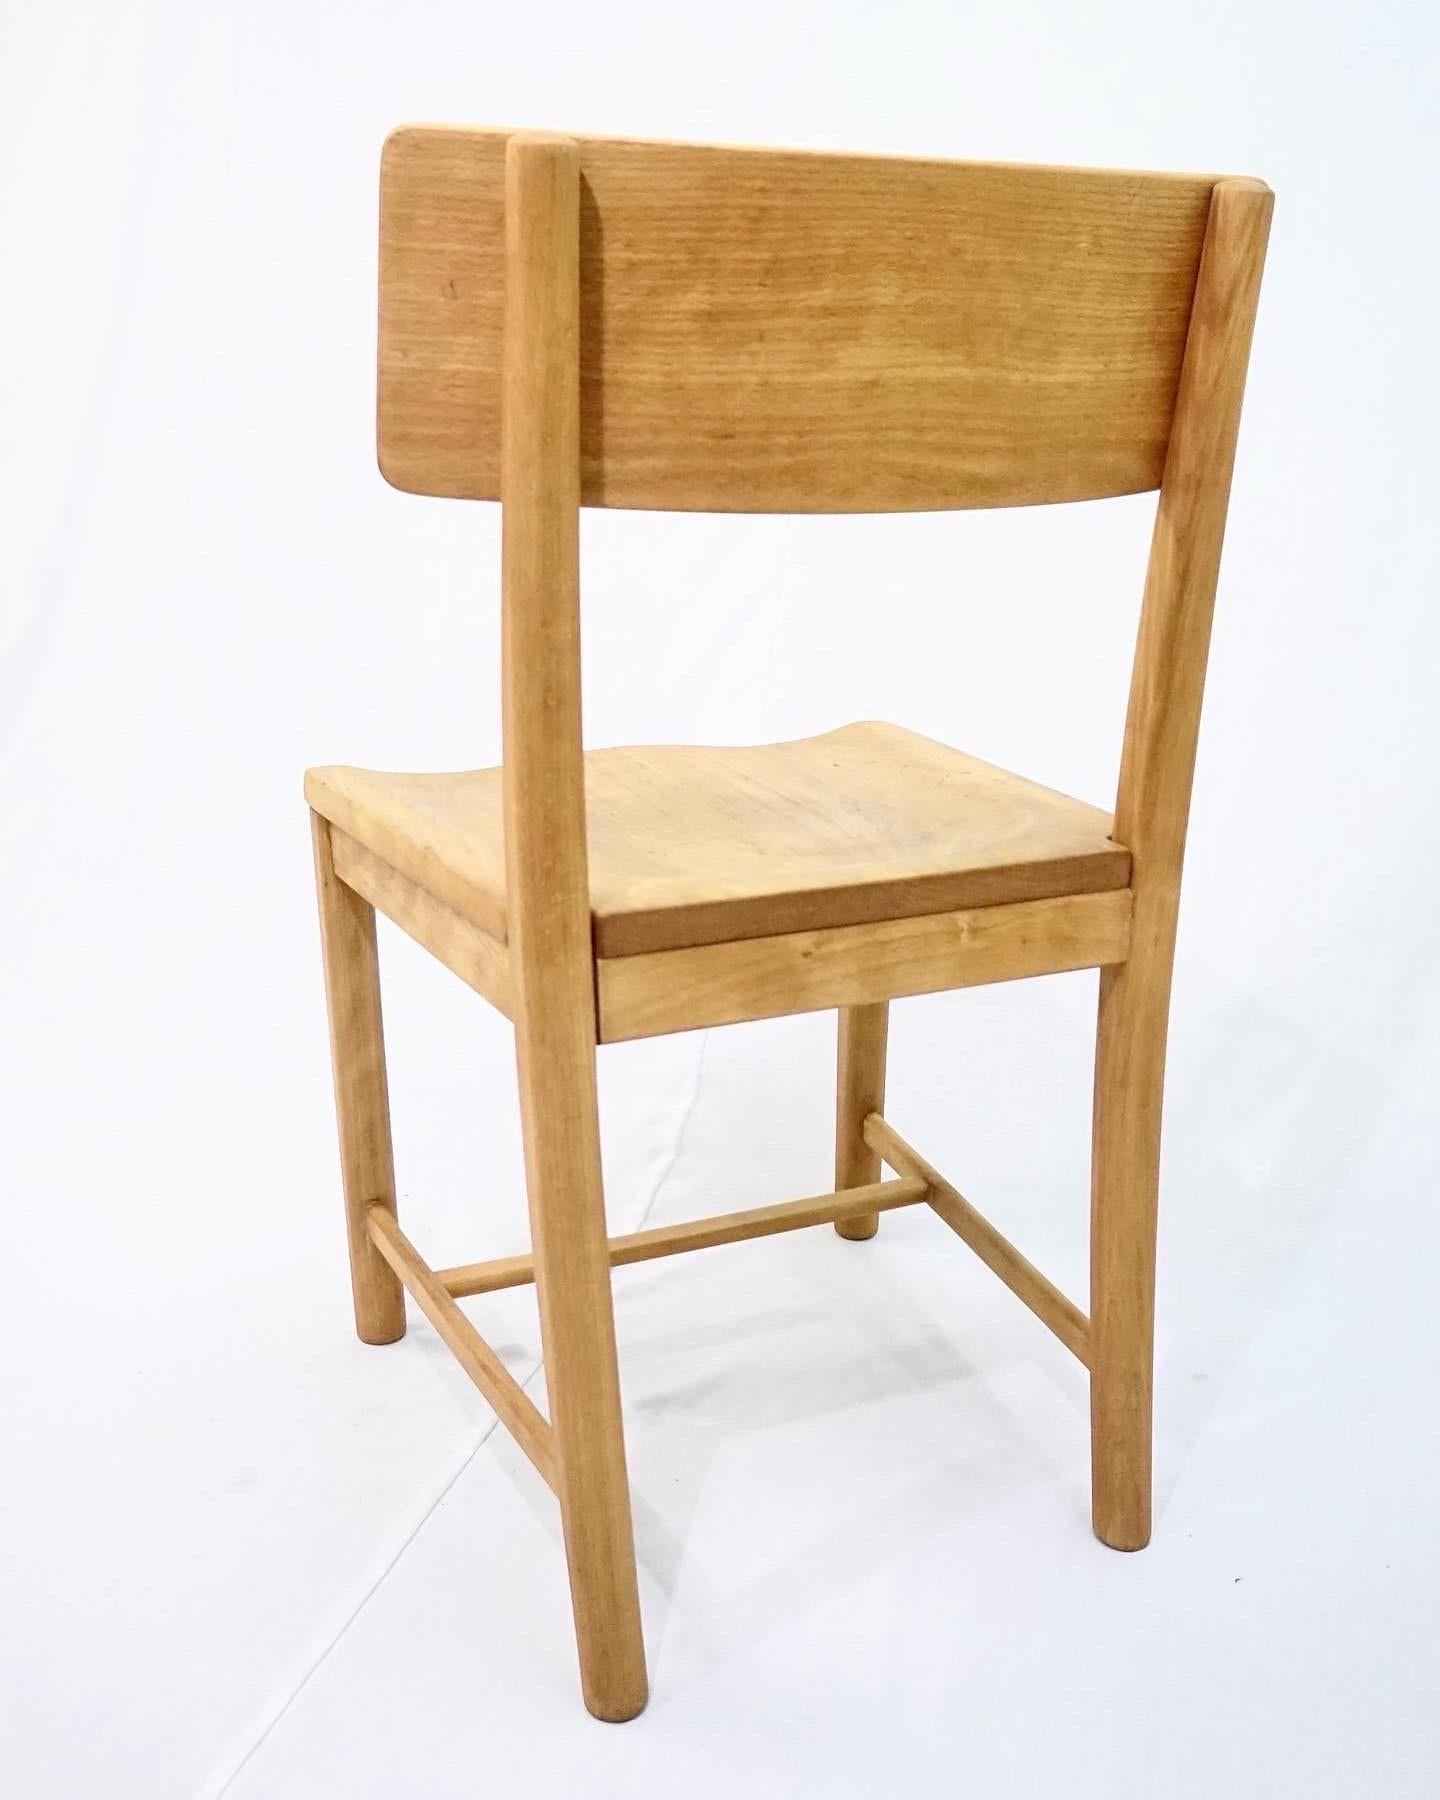 Rare side chair and stool designed by Mogens Koch in the 1930’s for the office’s at Skive & Sønderborg stats hospital. The chair and stool is made in solid beech wood and has been restored by a danish cabinetmaker.